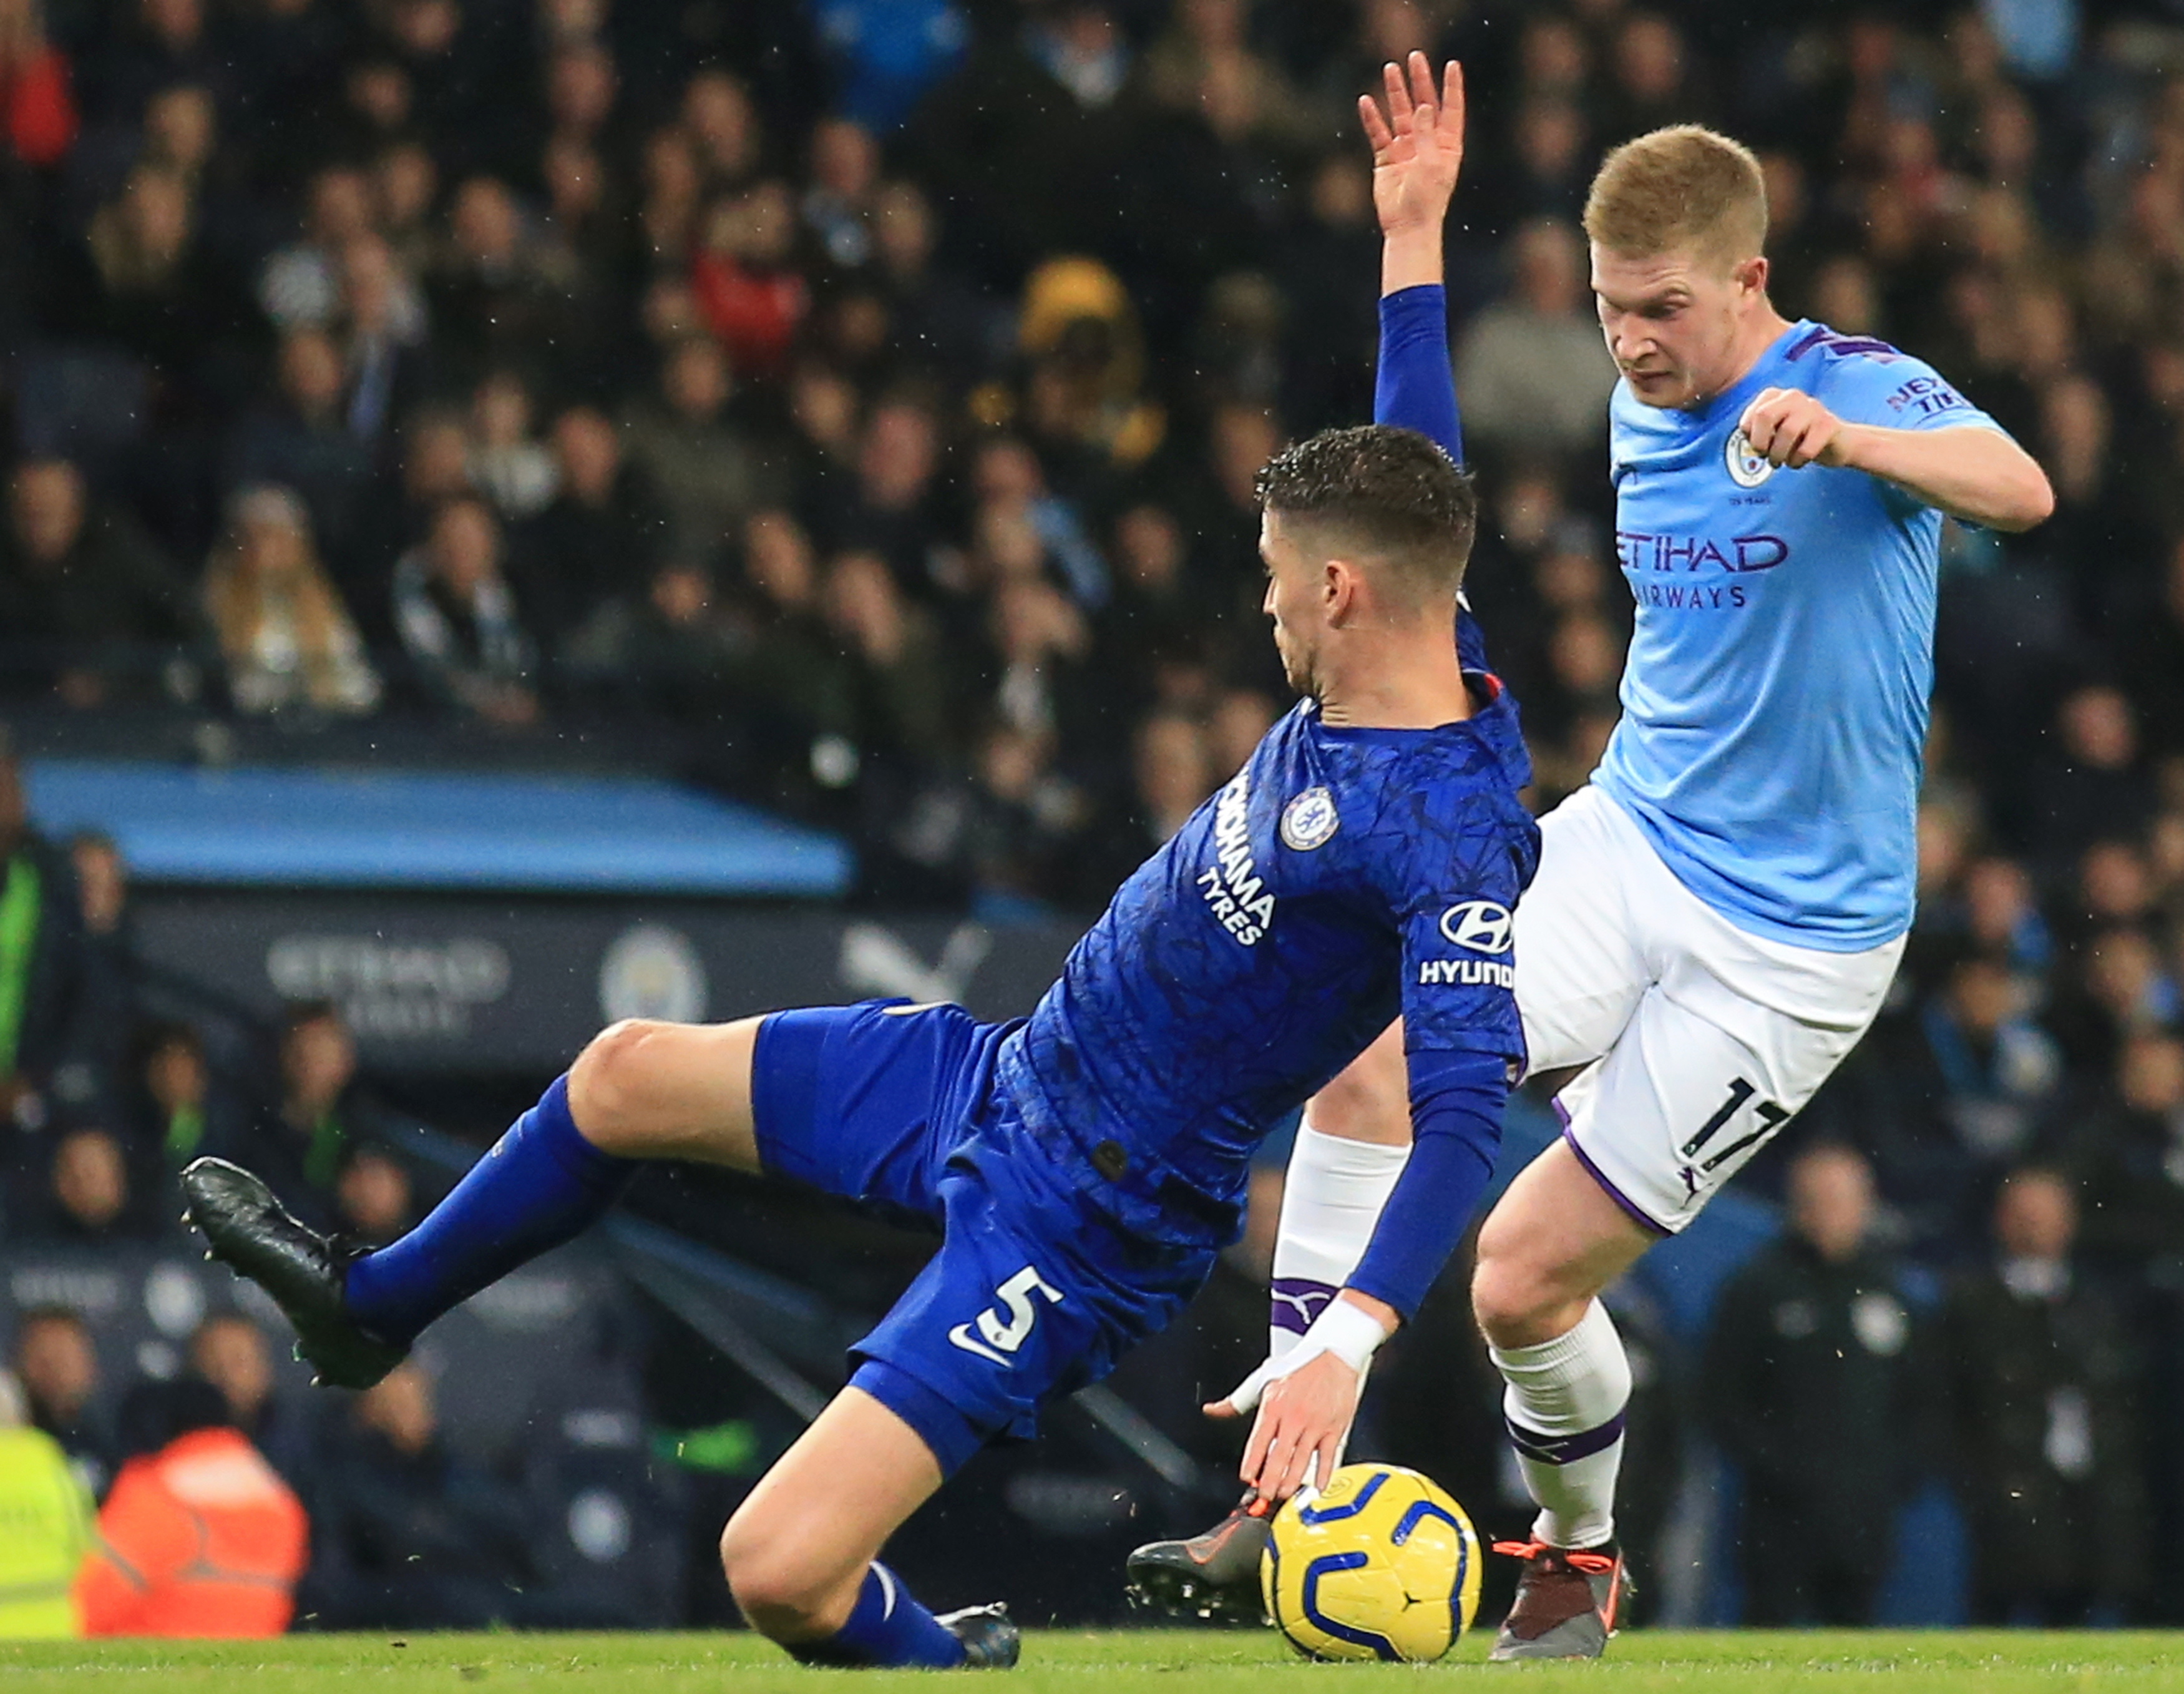 epa08020337 Manchester City's Kevin De Bruyne (R) in action against Chelsea's Jorginho (L) during the English Premier League match between Manchester City and Chelsea in Manchester, Britain, 23 November 2019.  EPA/JON SUPER EDITORIAL USE ONLY. No use with unauthorized audio, video, data, fixture lists, club/league logos or 'live' services. Online in-match use limited to 120 images, no video emulation. No use in betting, games or single club/league/player publications